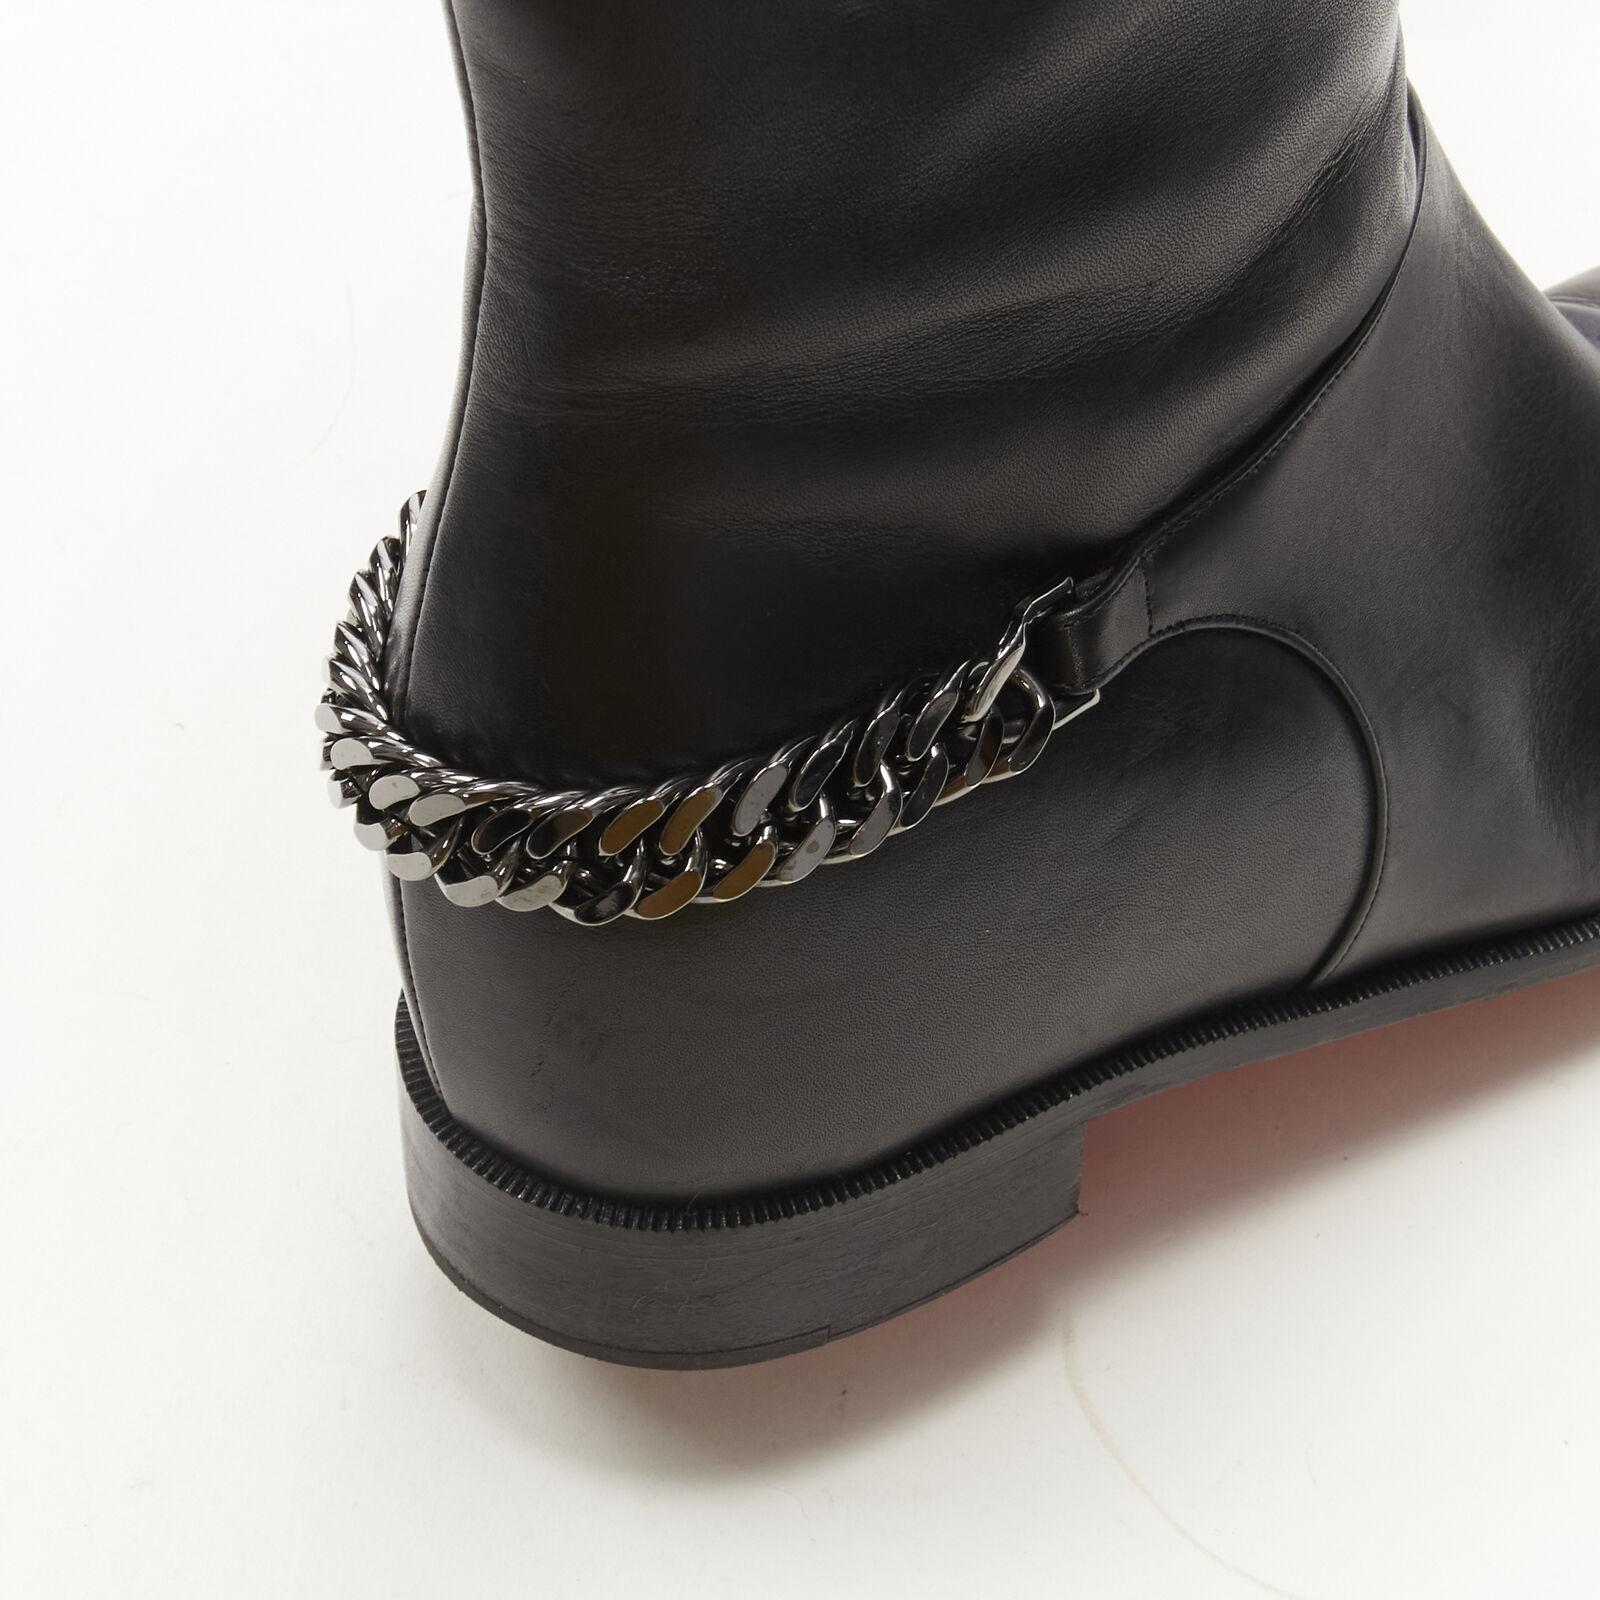 CHRISTIAN LOUBOUTIN Cate black leather chain concealed wedge tall boots EU38.5
Reference: KNLM/A00242
Brand: Christian Louboutin
Model: Cate
Material: Calfskin Leather
Color: Black, Silver
Pattern: Solid
Closure: Pull On
Lining: Leather
Extra